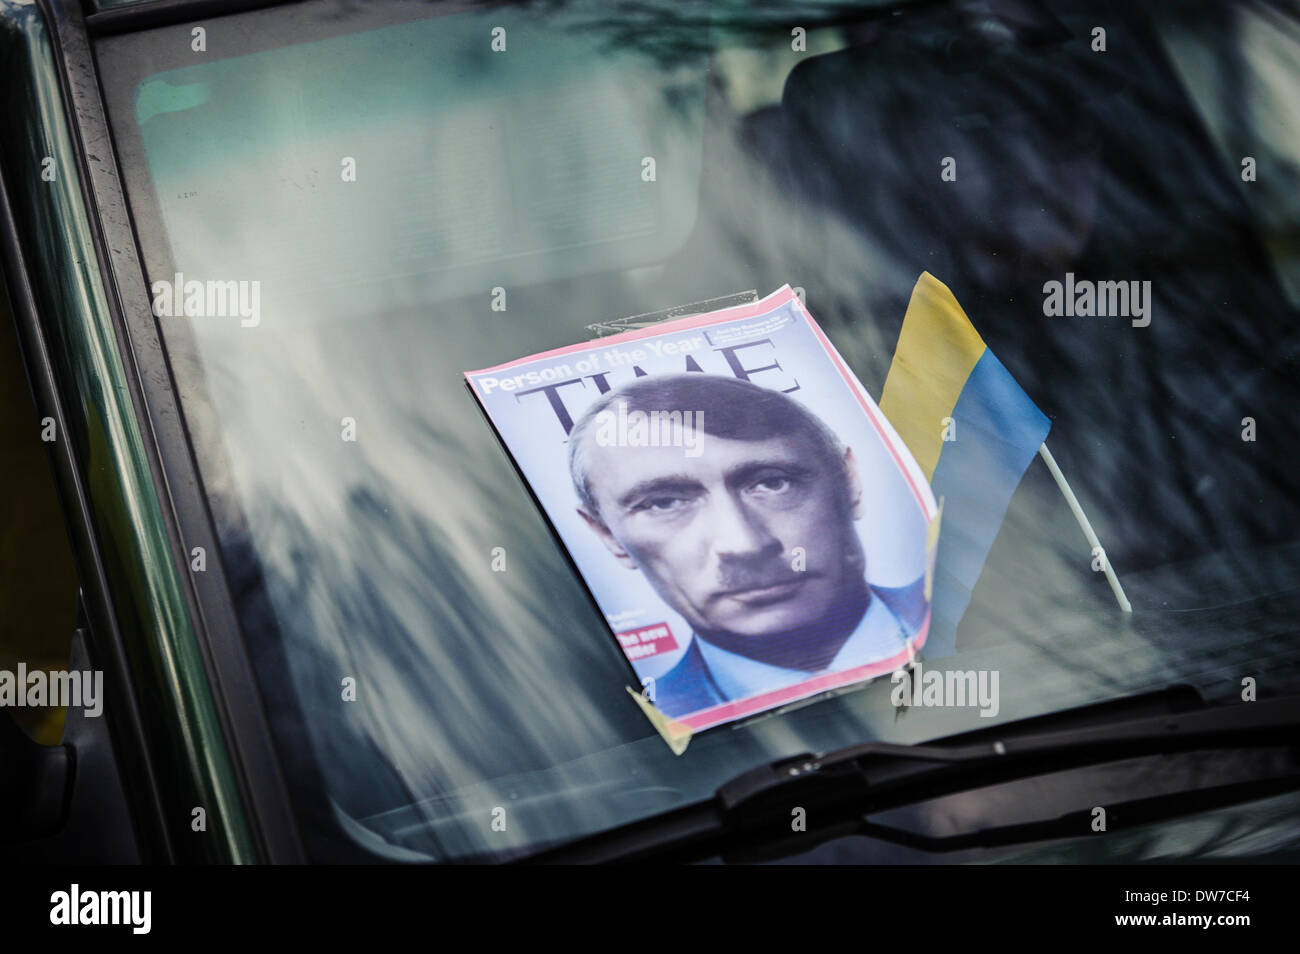 Brussels, Belgium. 2nd March 2014. Time magazine Person of the Year front cover depicting Russian President Putin as Hitler is left on a car windshield by Ukrainian protesters during a demonstration in front of the Russia Embassy in Brussels, Belgium. Automaidan, an organised car procession by a group of motorists supporting Ukraine's pro-European protests, stopped in front of the embassy building to protest against Russia's aggressive policy towards Ukraine. Credit:  ZUMA Press, Inc./Alamy Live News Stock Photo